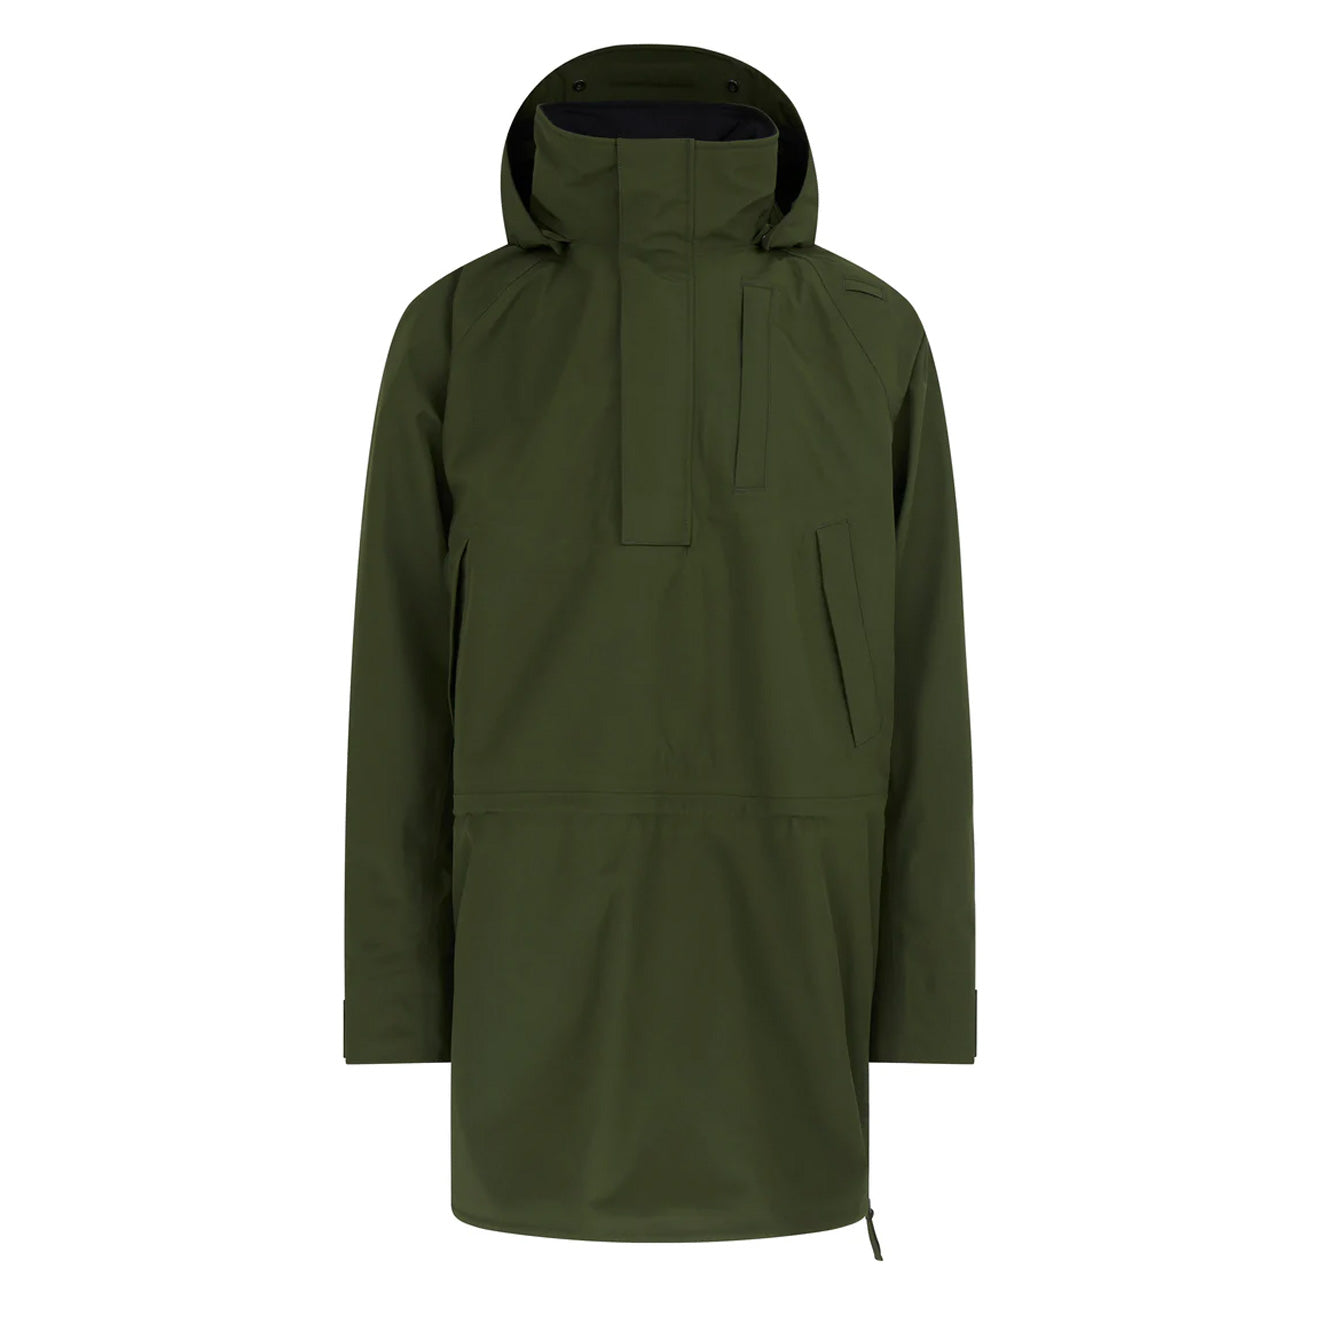 James Purdey Atholl Smock Rifle Green | The Sporting Lodge